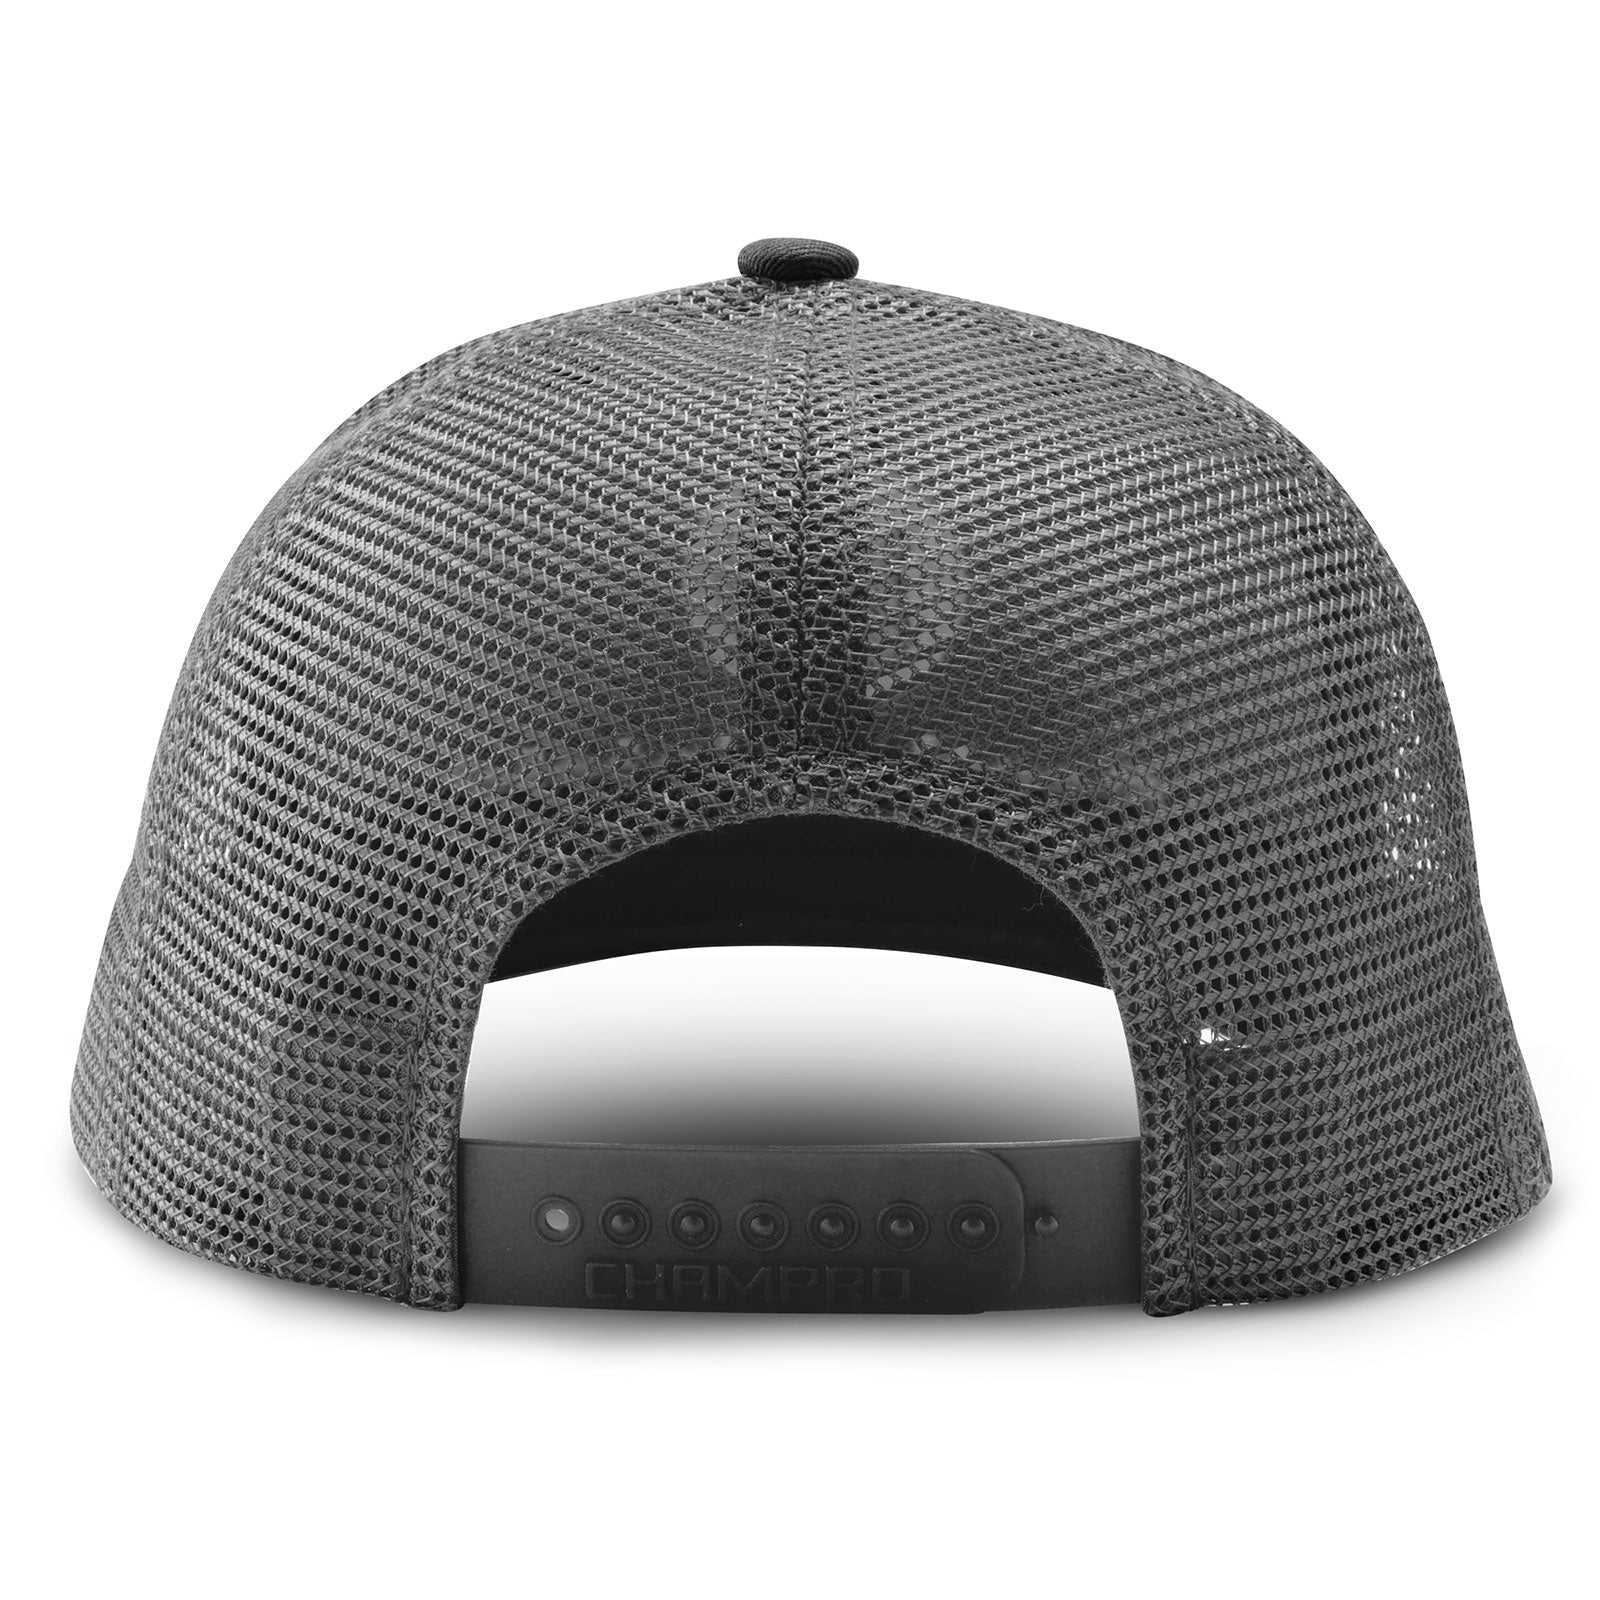 Champro HC5 Performance Trucker Snapback - Forest Green White Forest Green - HIT a Double